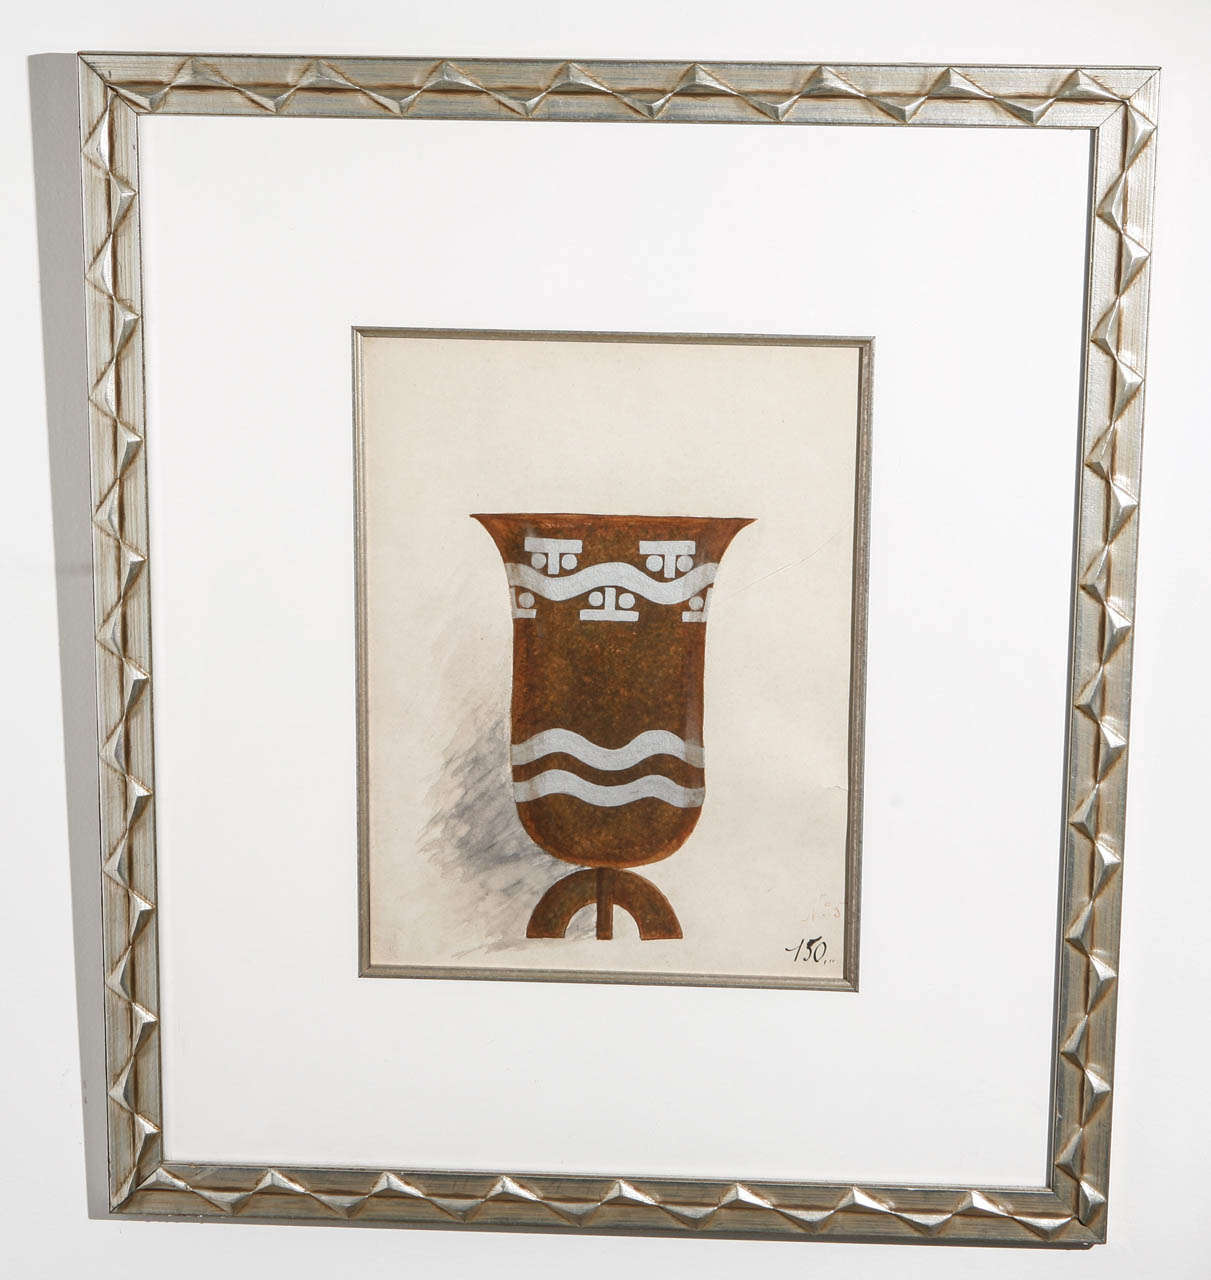 Beautifully framed gouache sketch of Dinanderie vessel Dinanderie is the French method of hammering silver onto bronze.